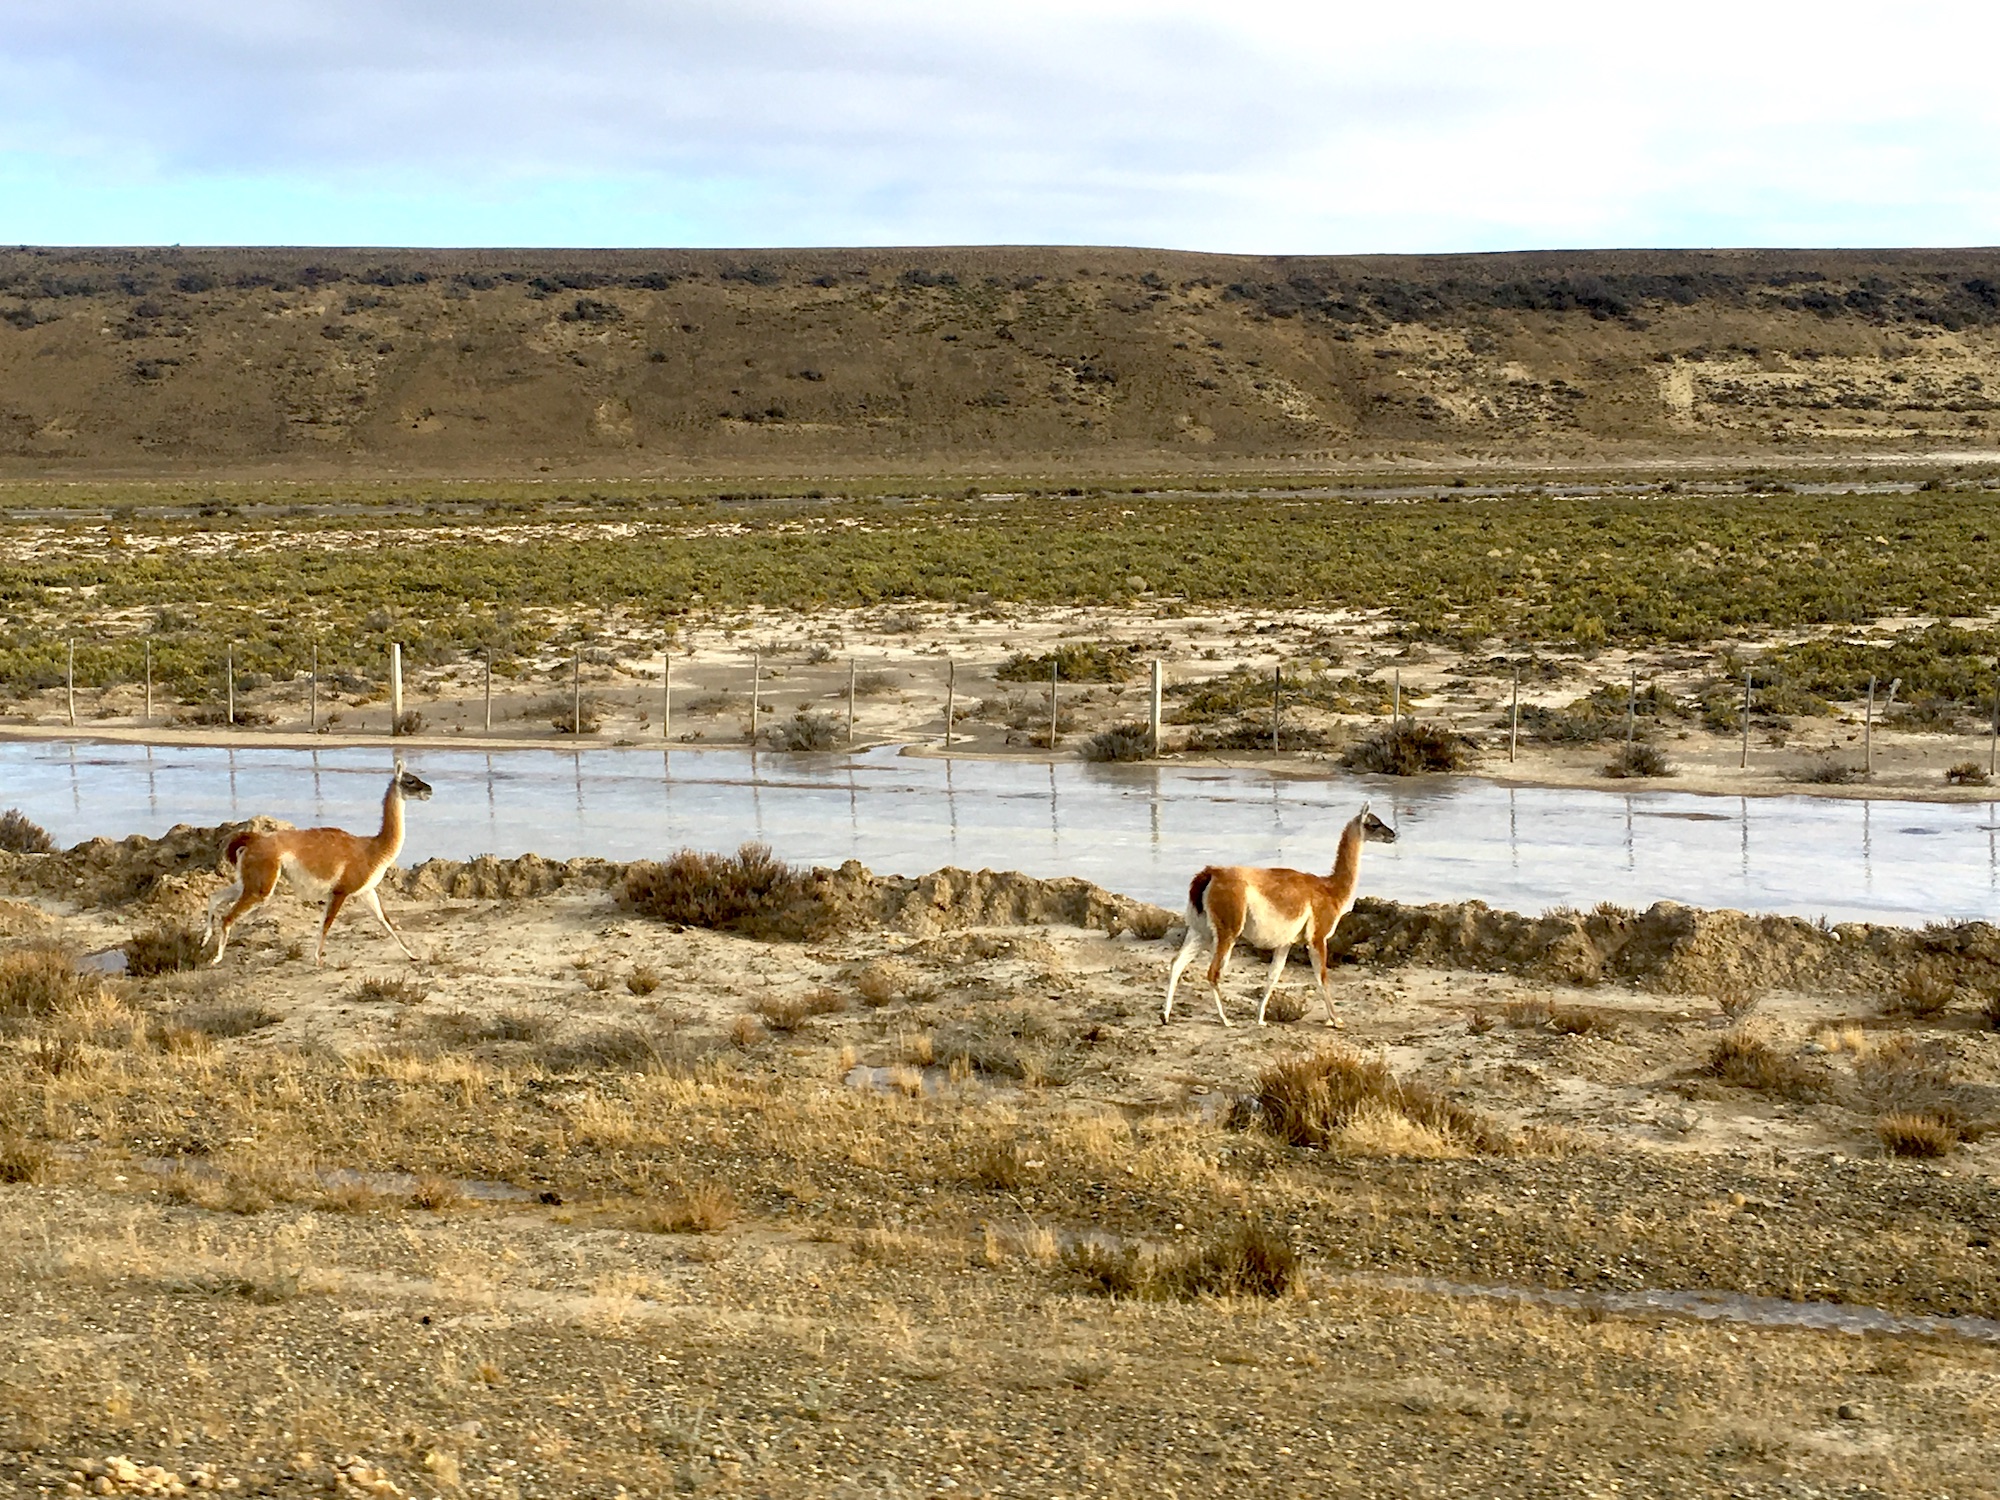 Guanacos, camelid native to South America